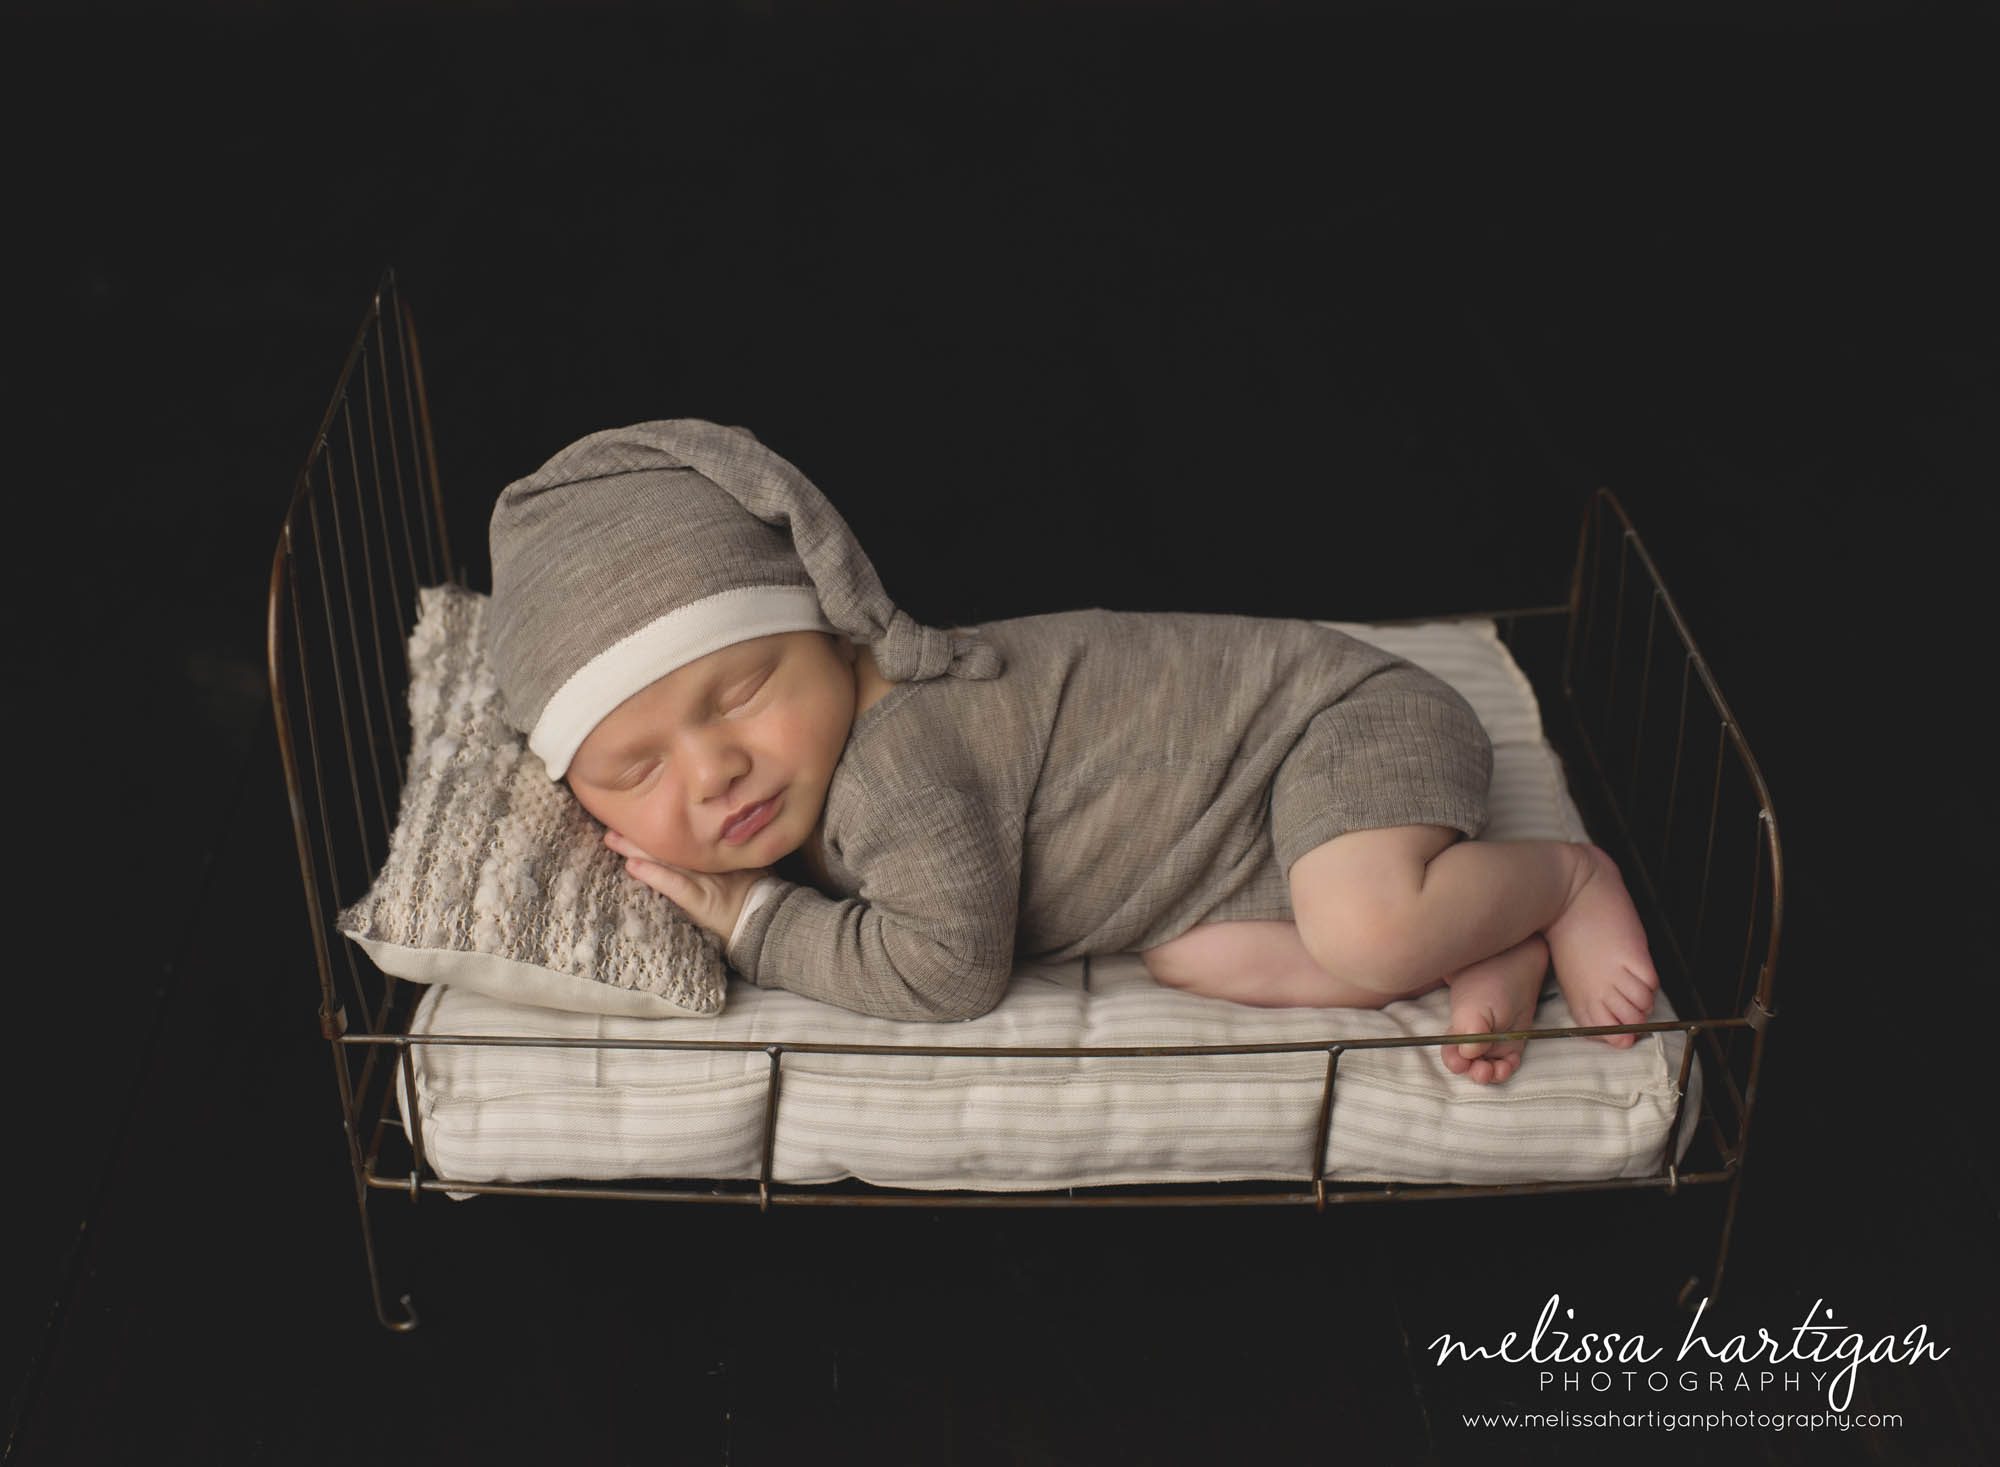 baby boy posed on metal prop bed wearing neutral colored sleepy hat and outfit